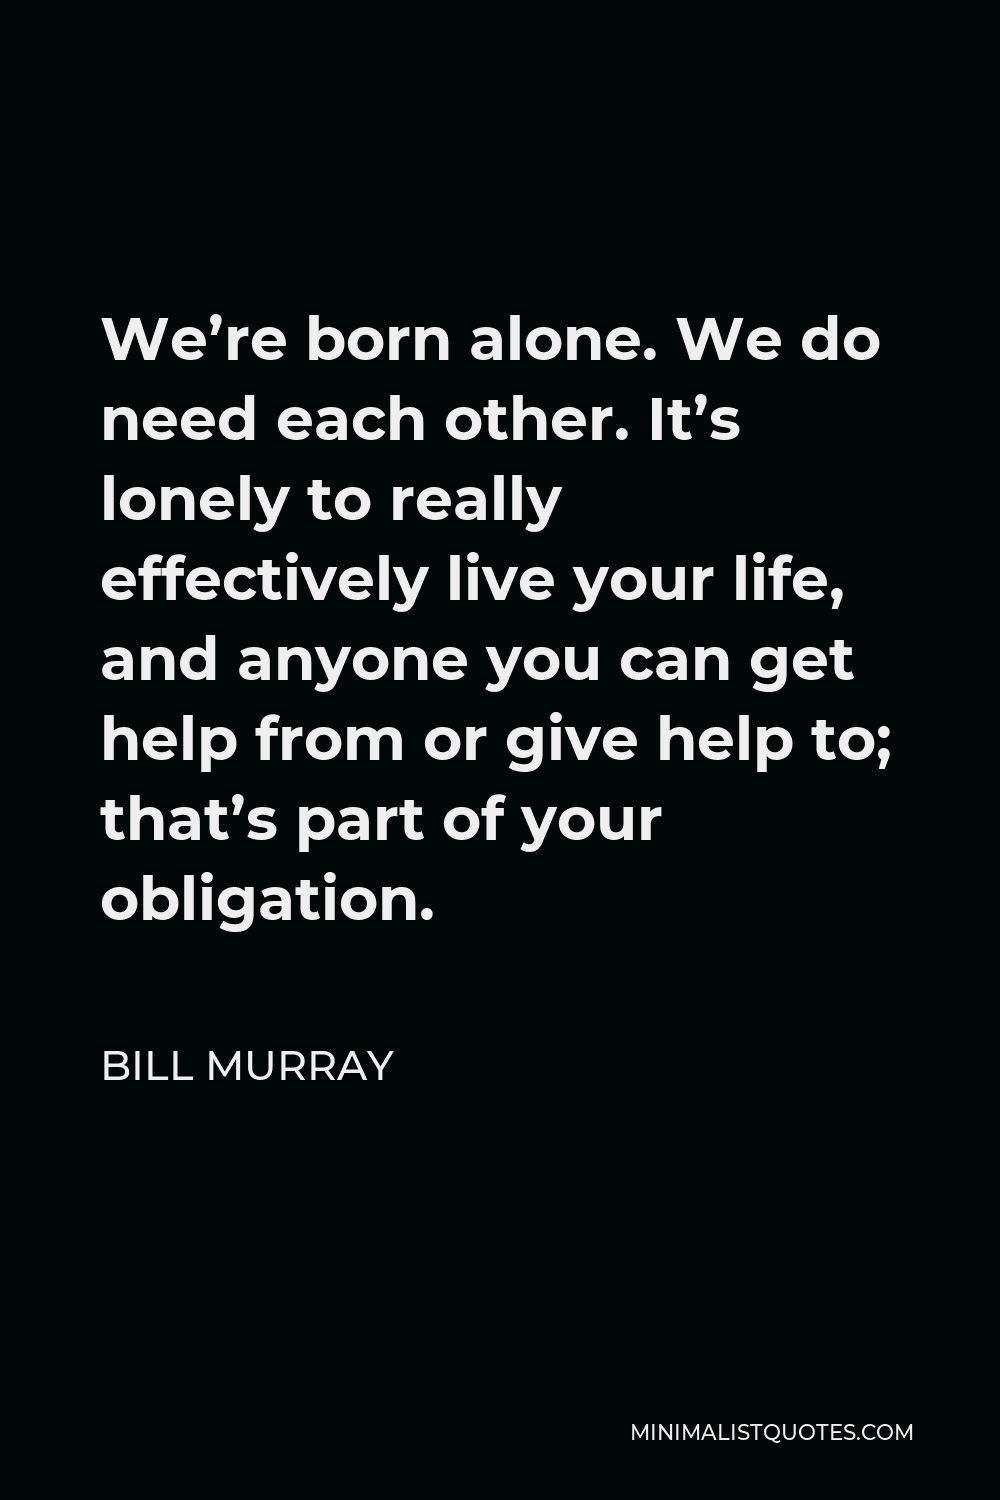 Bill Murray Quote - We’re born alone. We do need each other. It’s lonely to really effectively live your life, and anyone you can get help from or give help to; that’s part of your obligation.